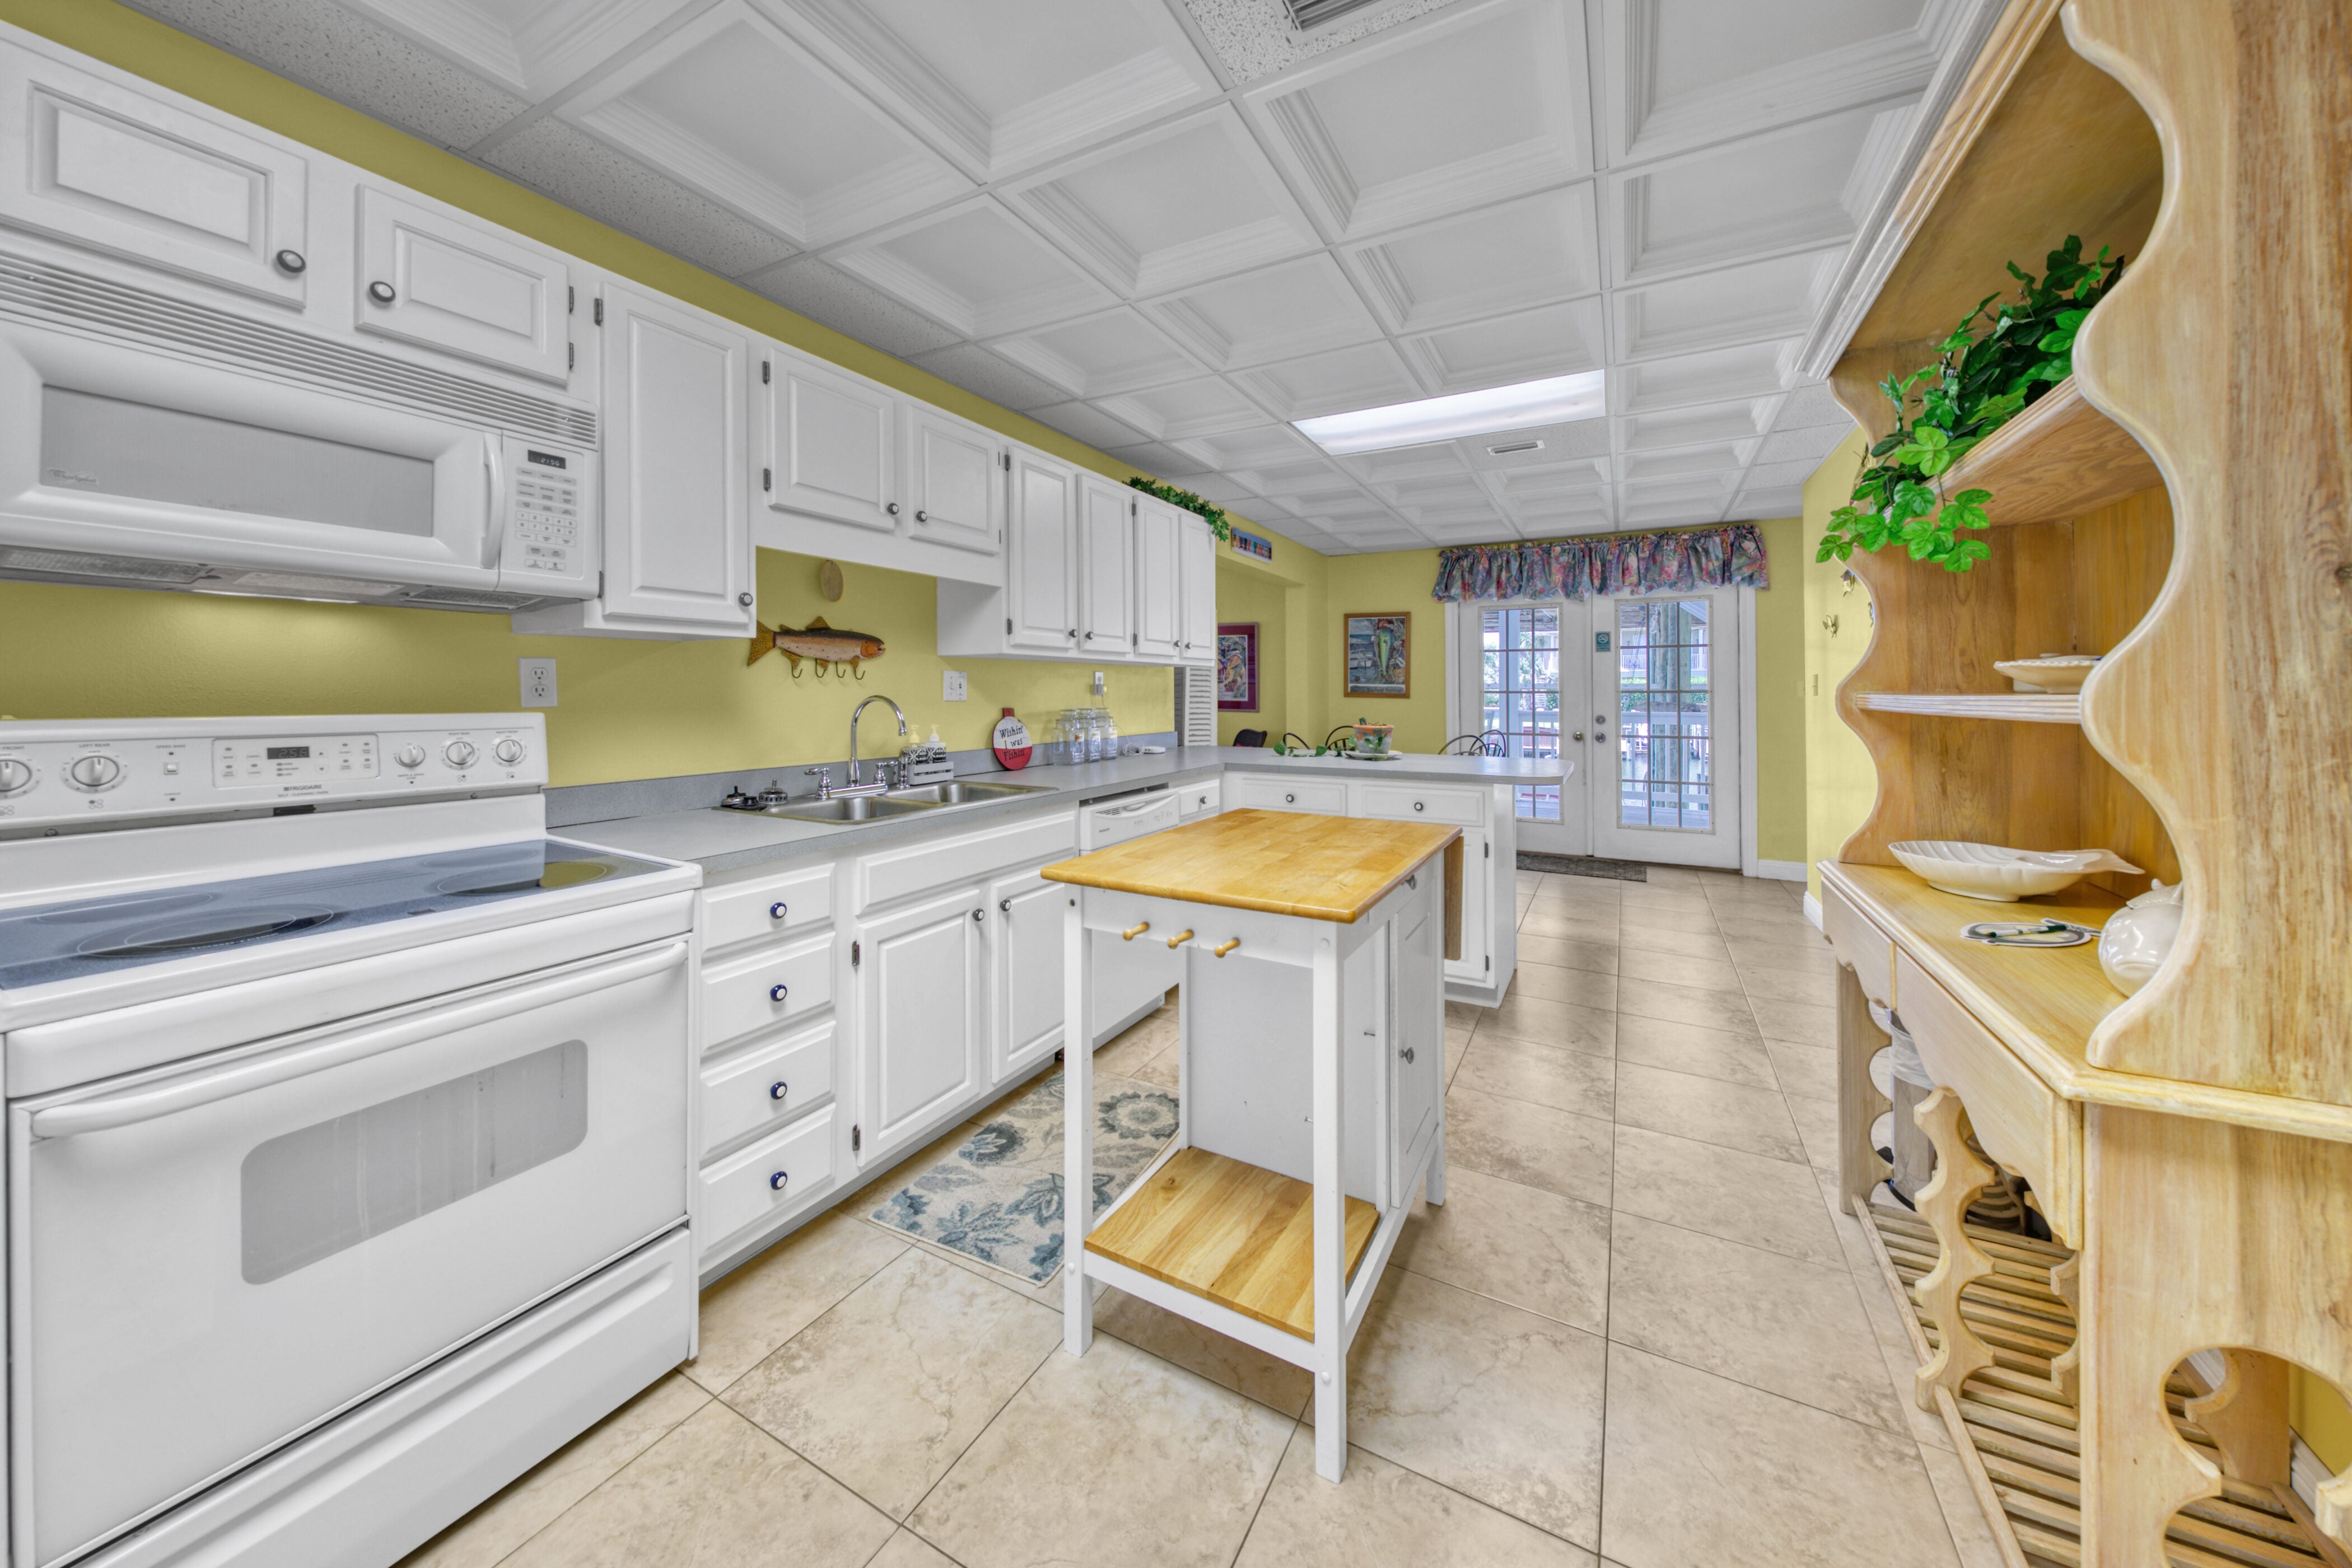 Spacious kitchen has all you need